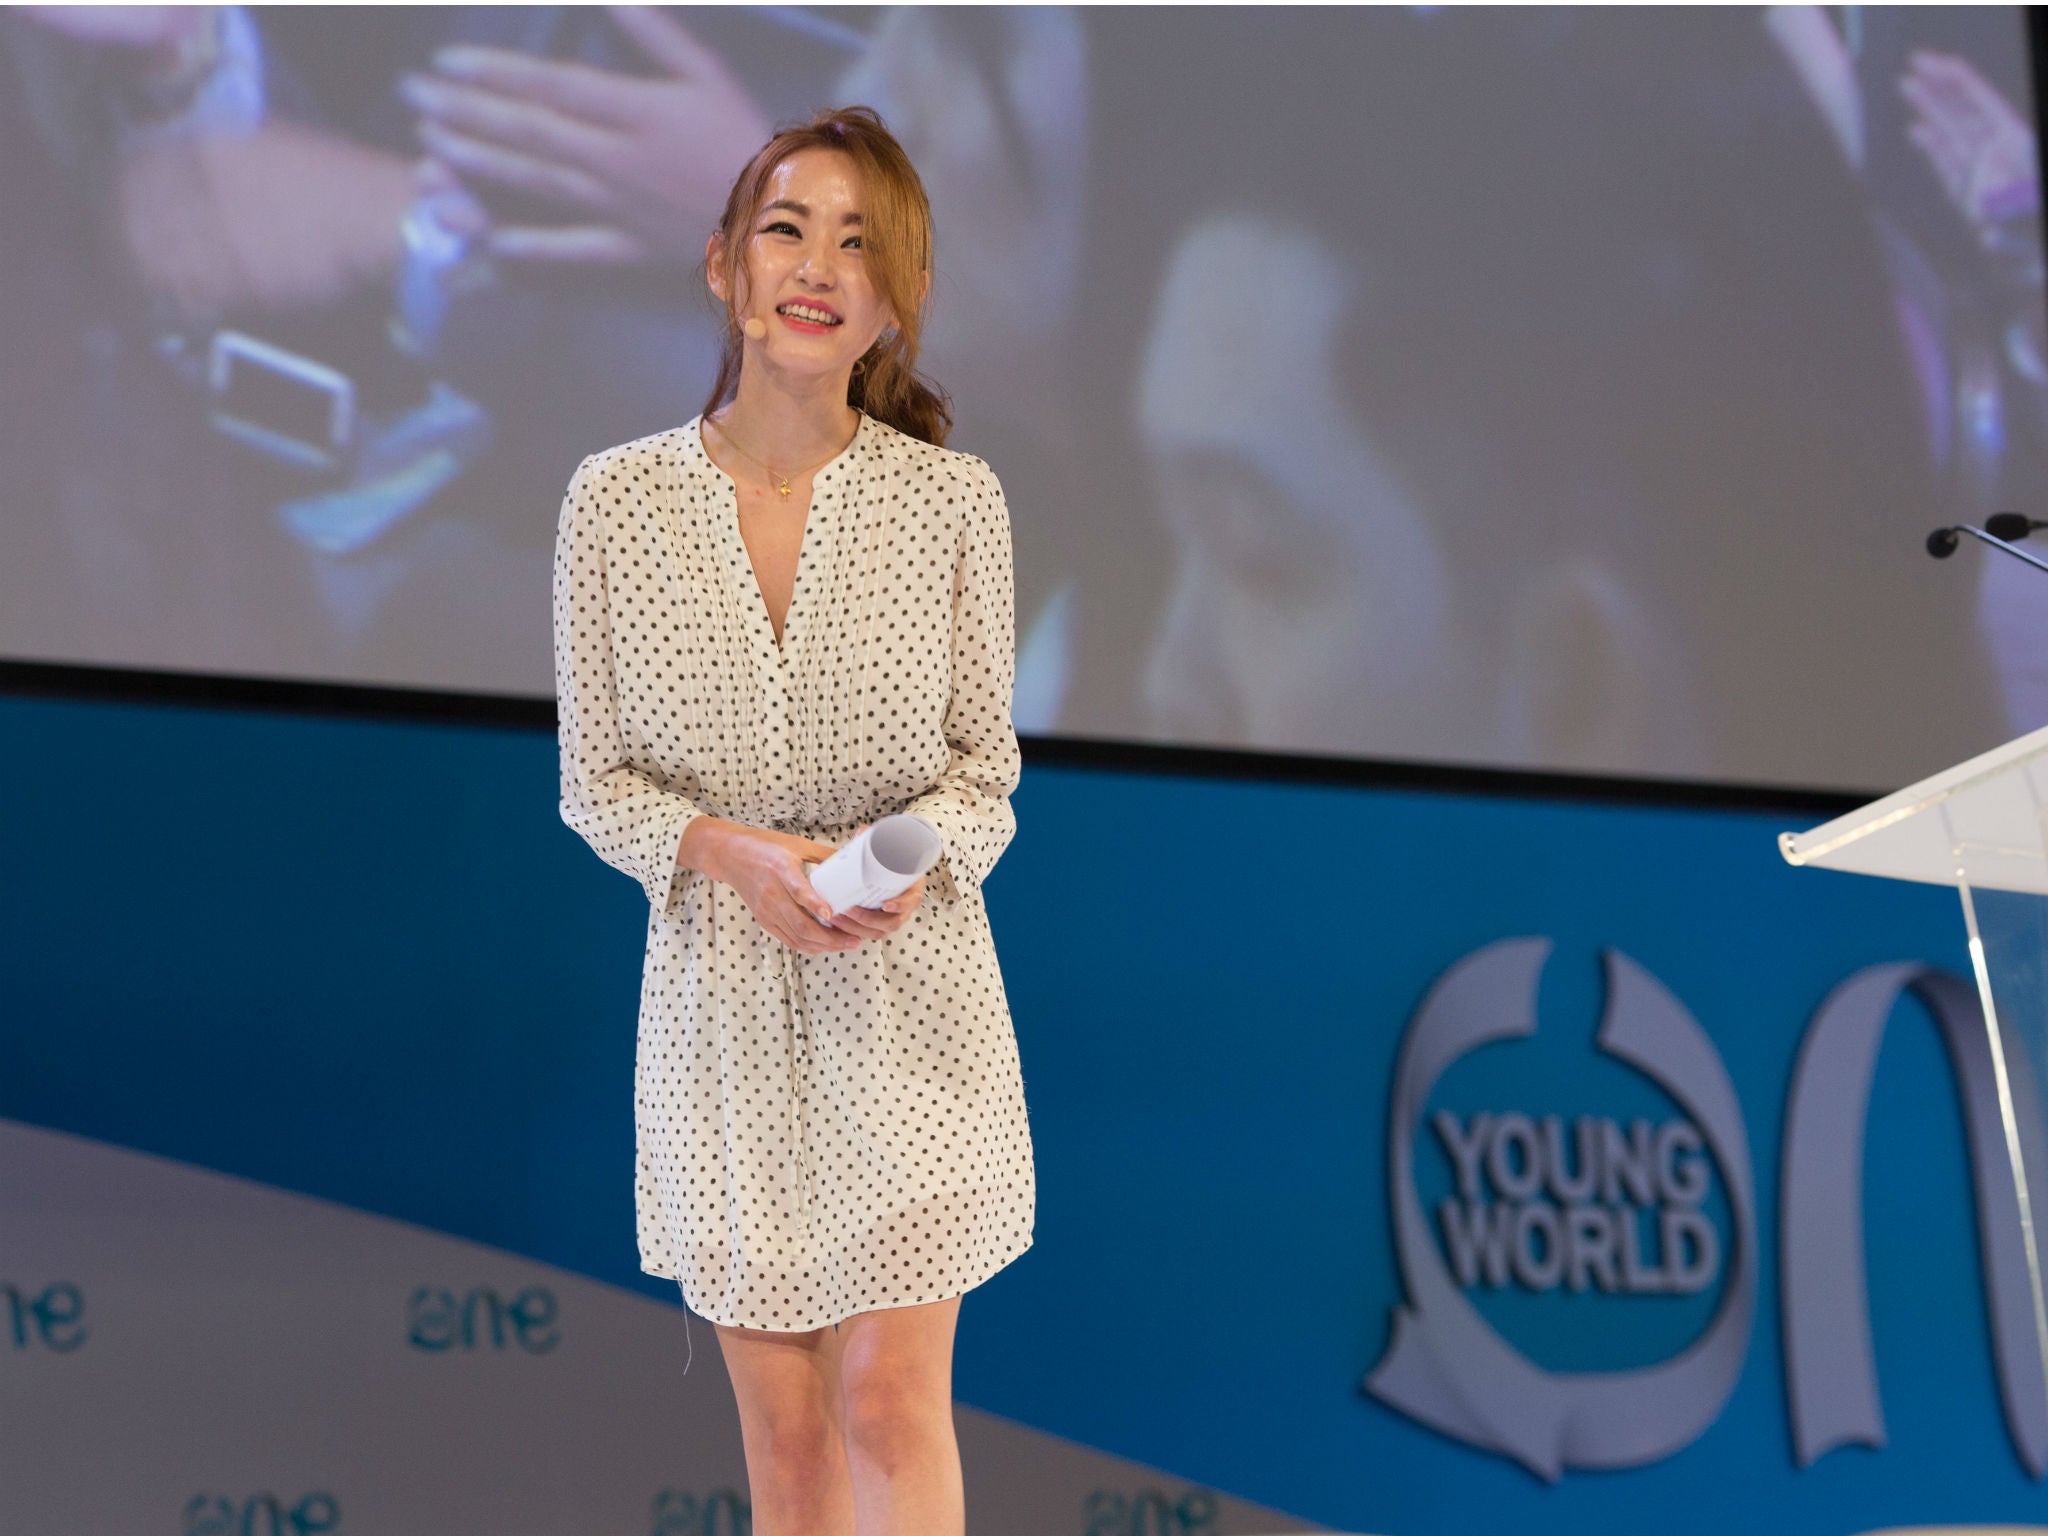 Park returned to the 2015 summit a year after her viral speech